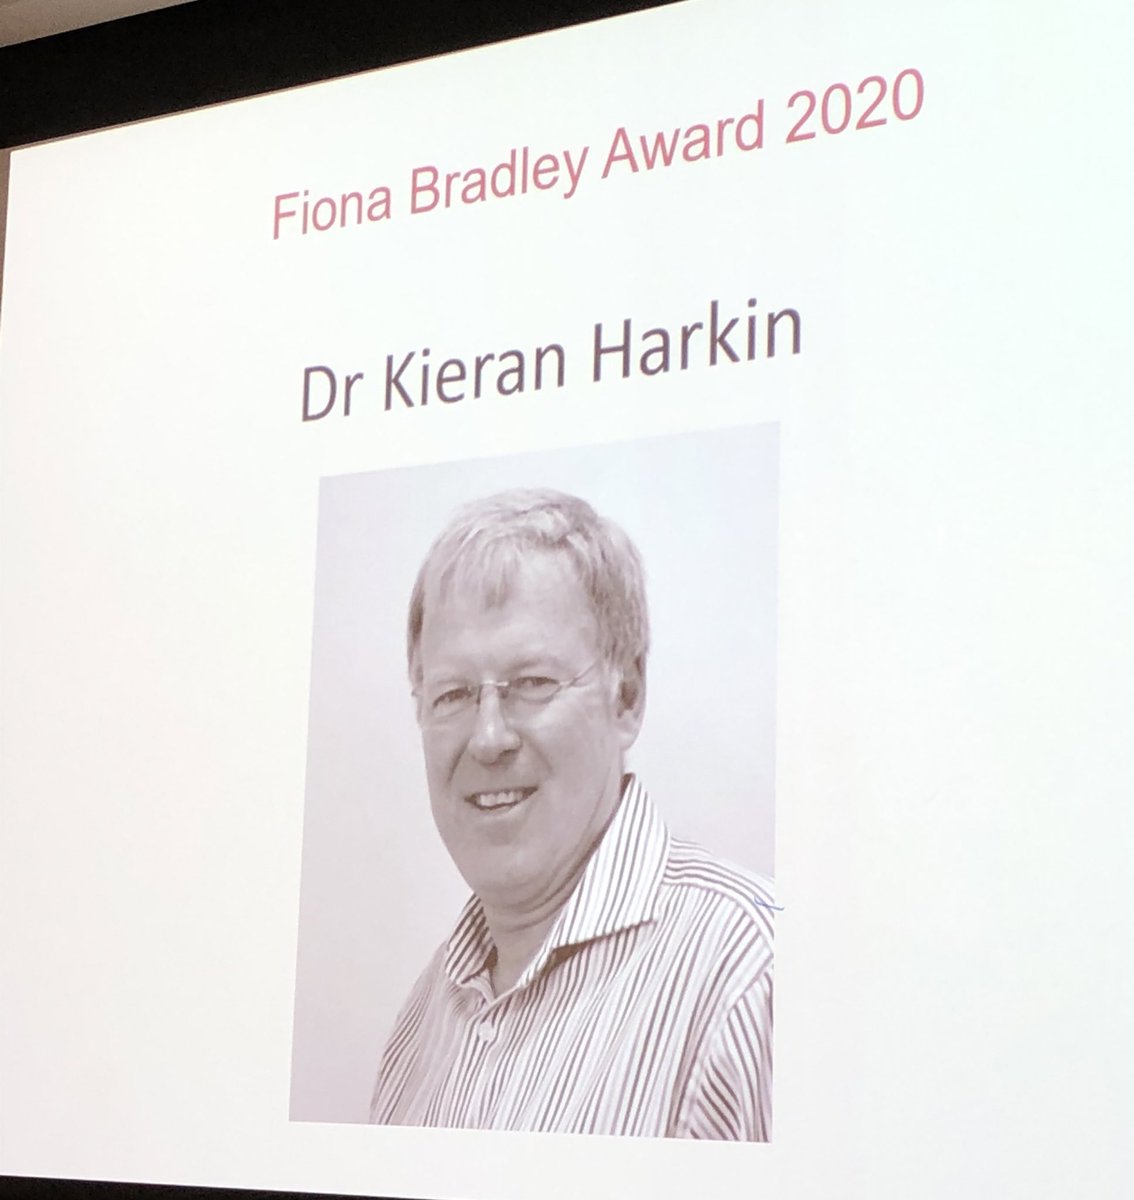 Really delighted that my friend @Kieranpharkin is the winner of this years @AUDGPI #FionaBradleyAward 👏🏻 An inspiring advocate & #GP who has worked for many years on #healthinequity, #socialjustice & #inclusionhealth 👍🏽 #AUDGPI20 #beaGP